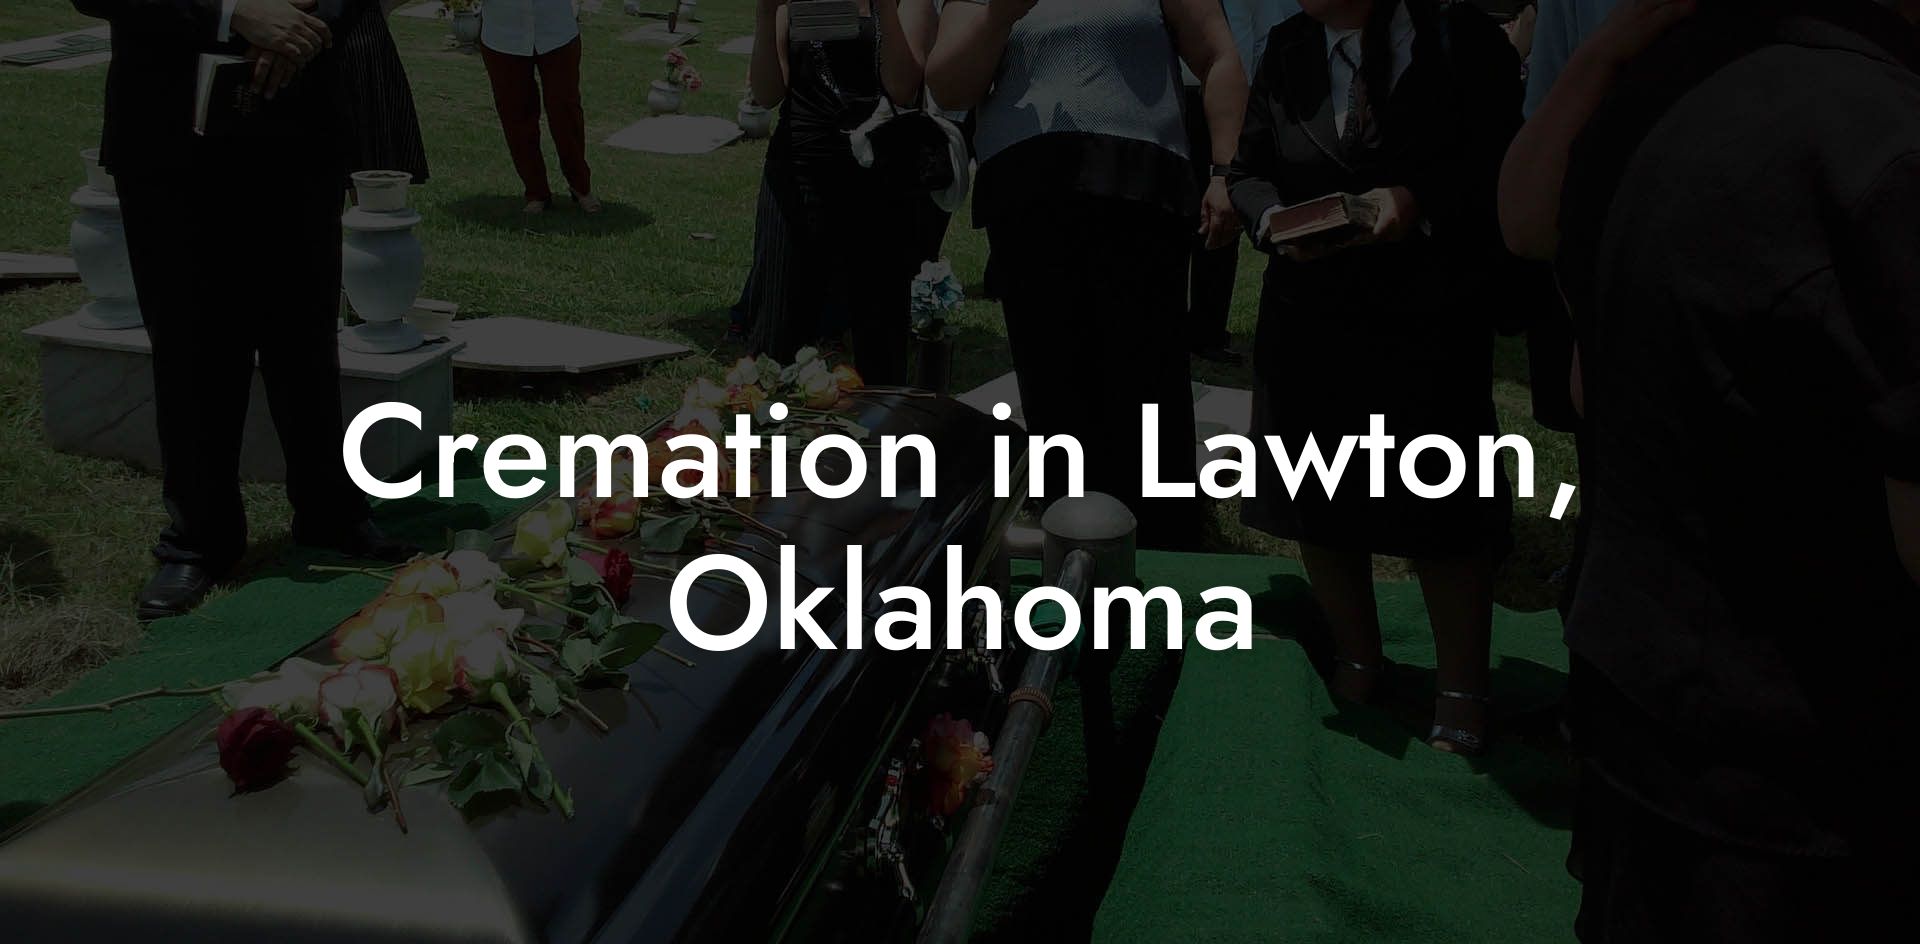 Cremation in Lawton, Oklahoma